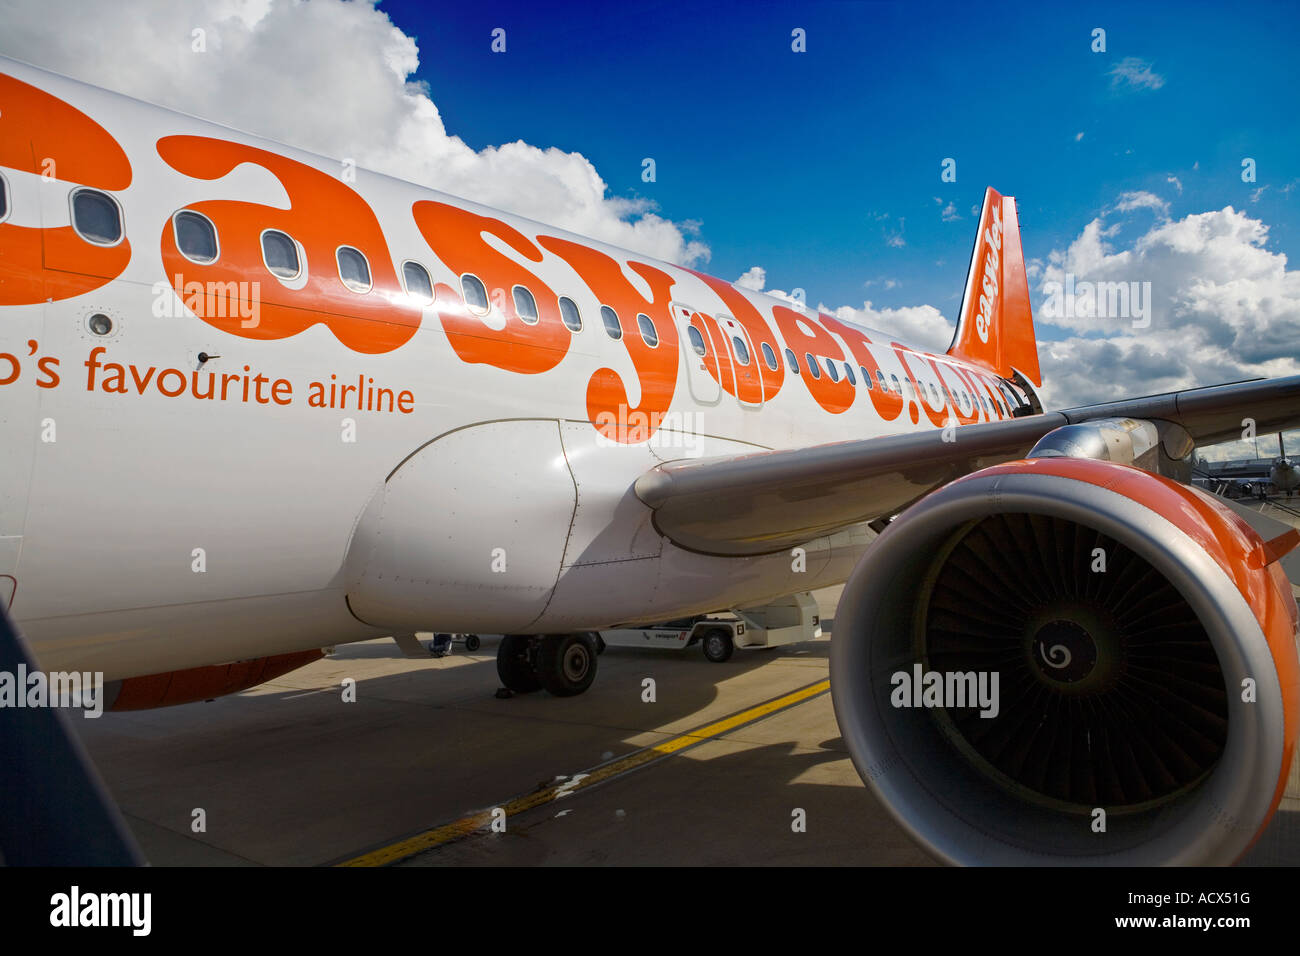 Easyjet plane on the runway at Stansted runway Stock Photo